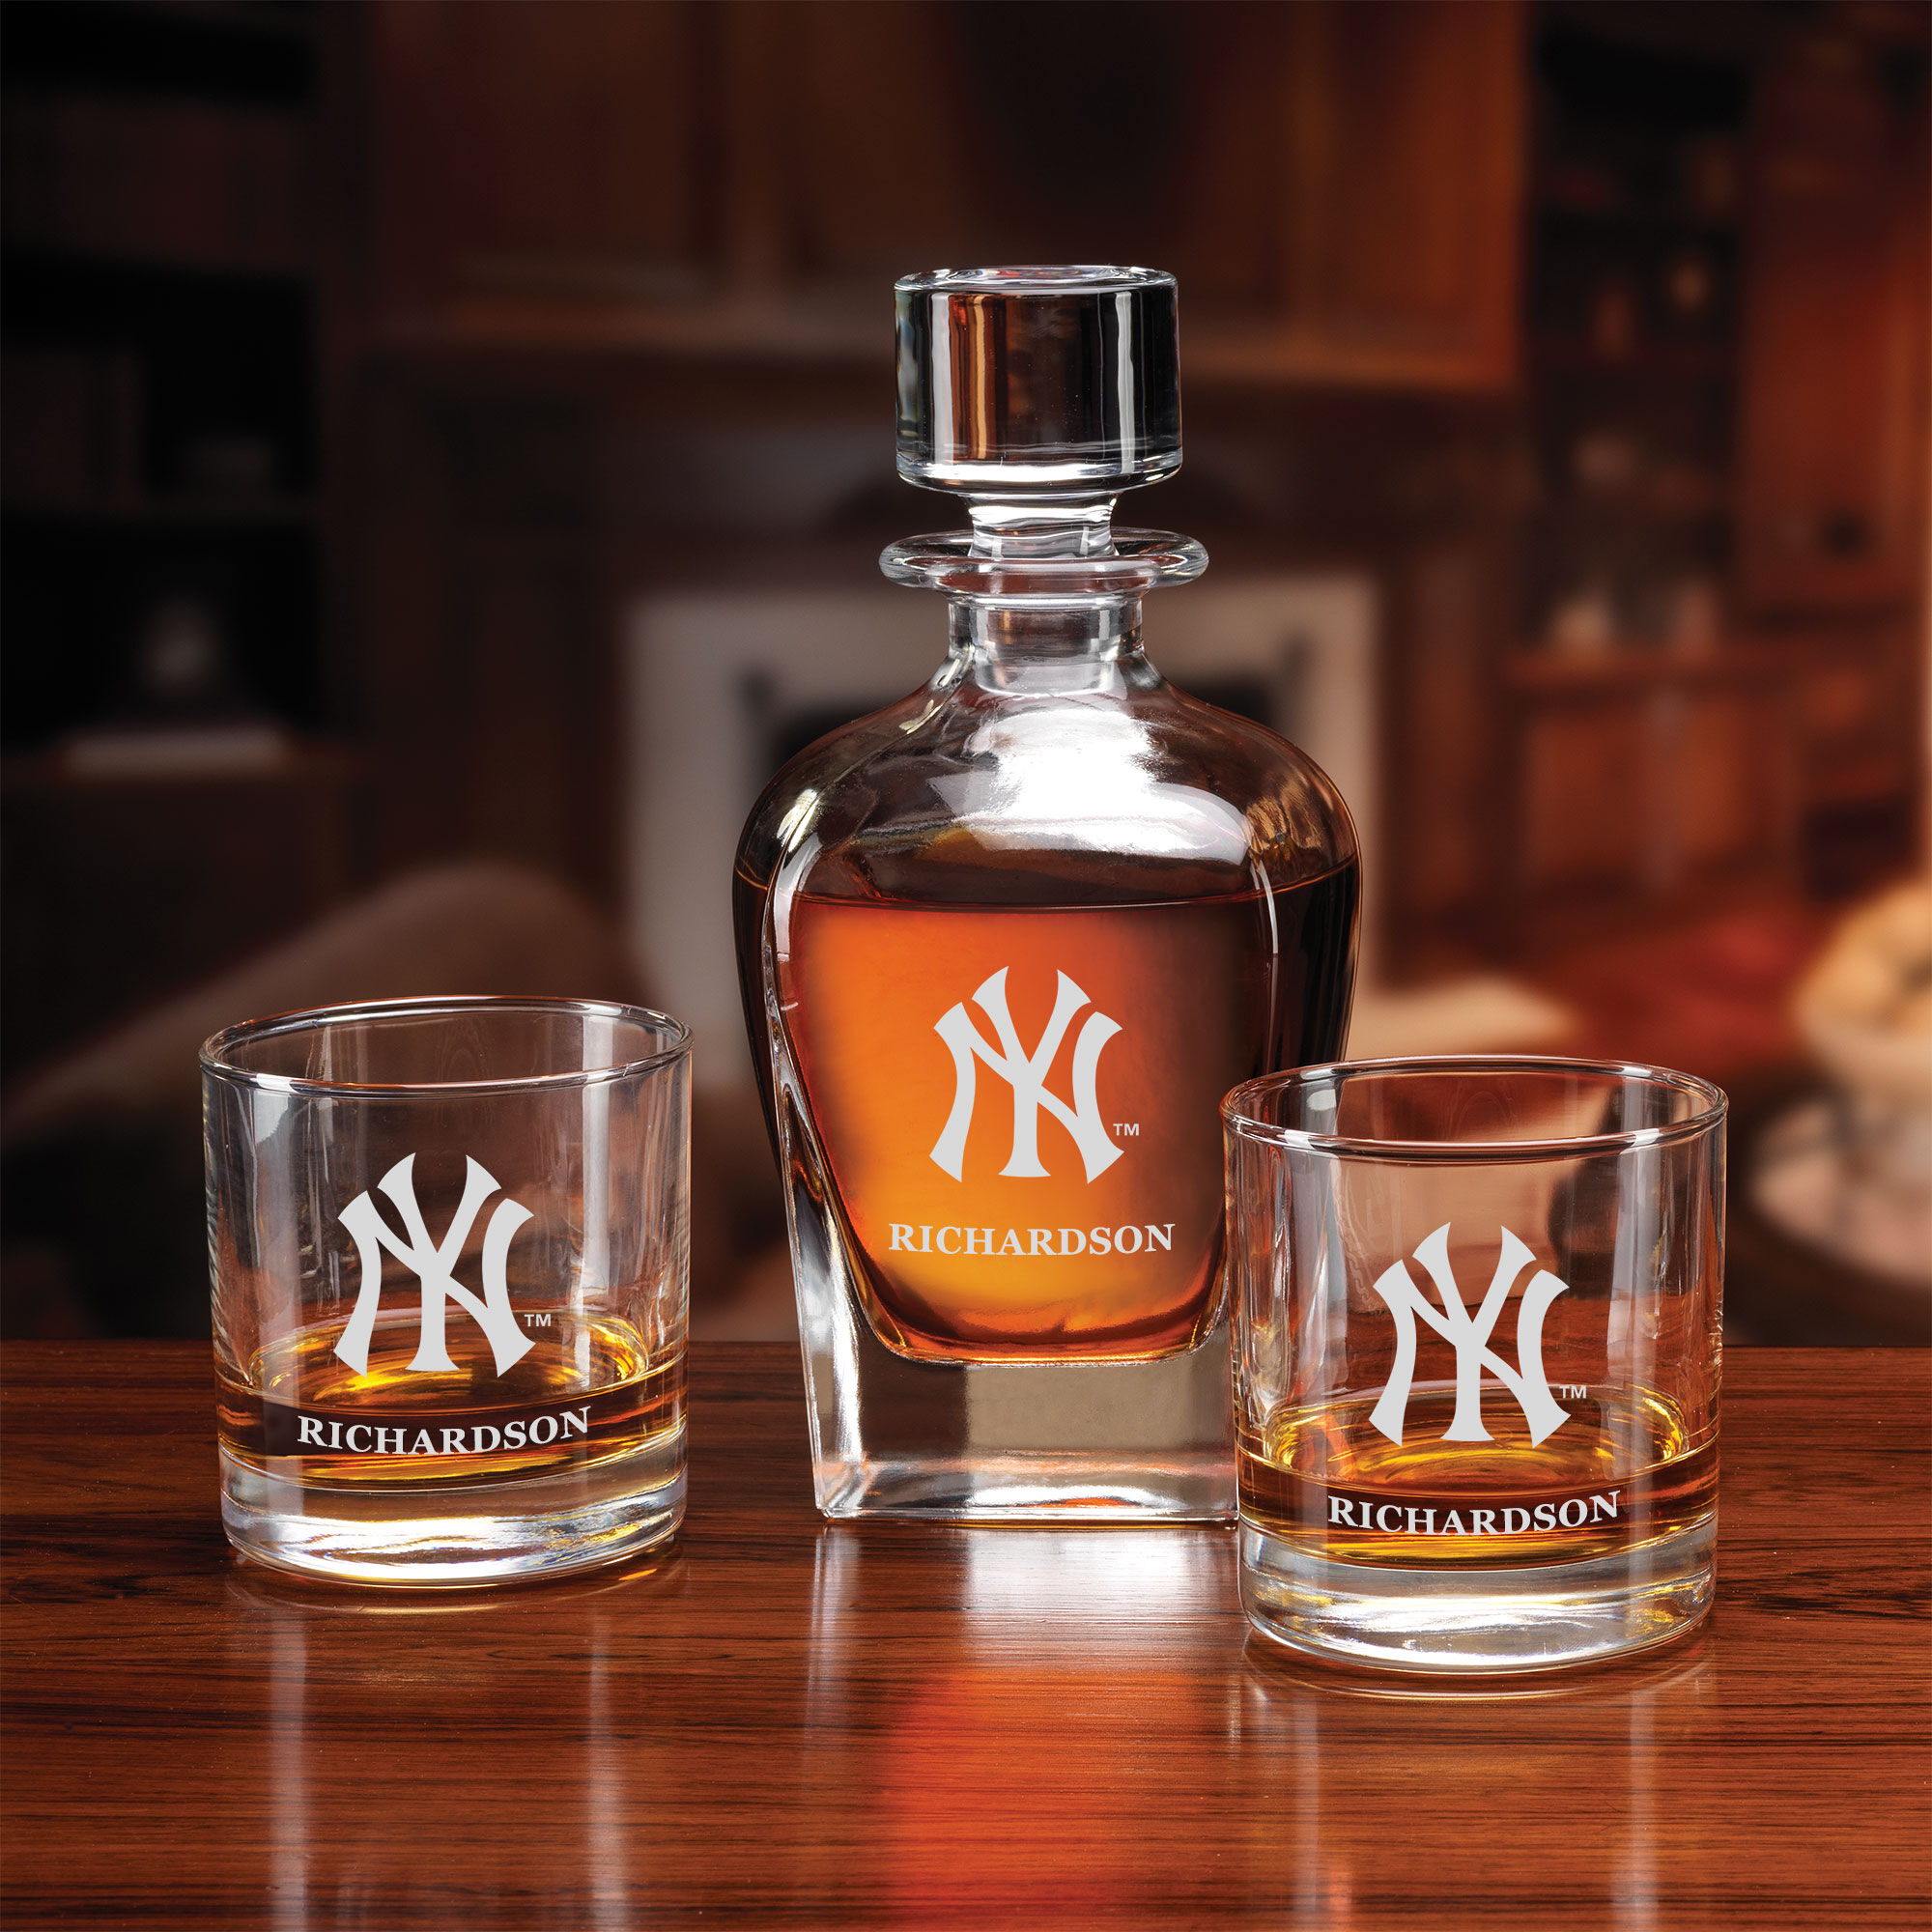 The Personalized New York Yankees Decanter Set 10128 0014 b bar